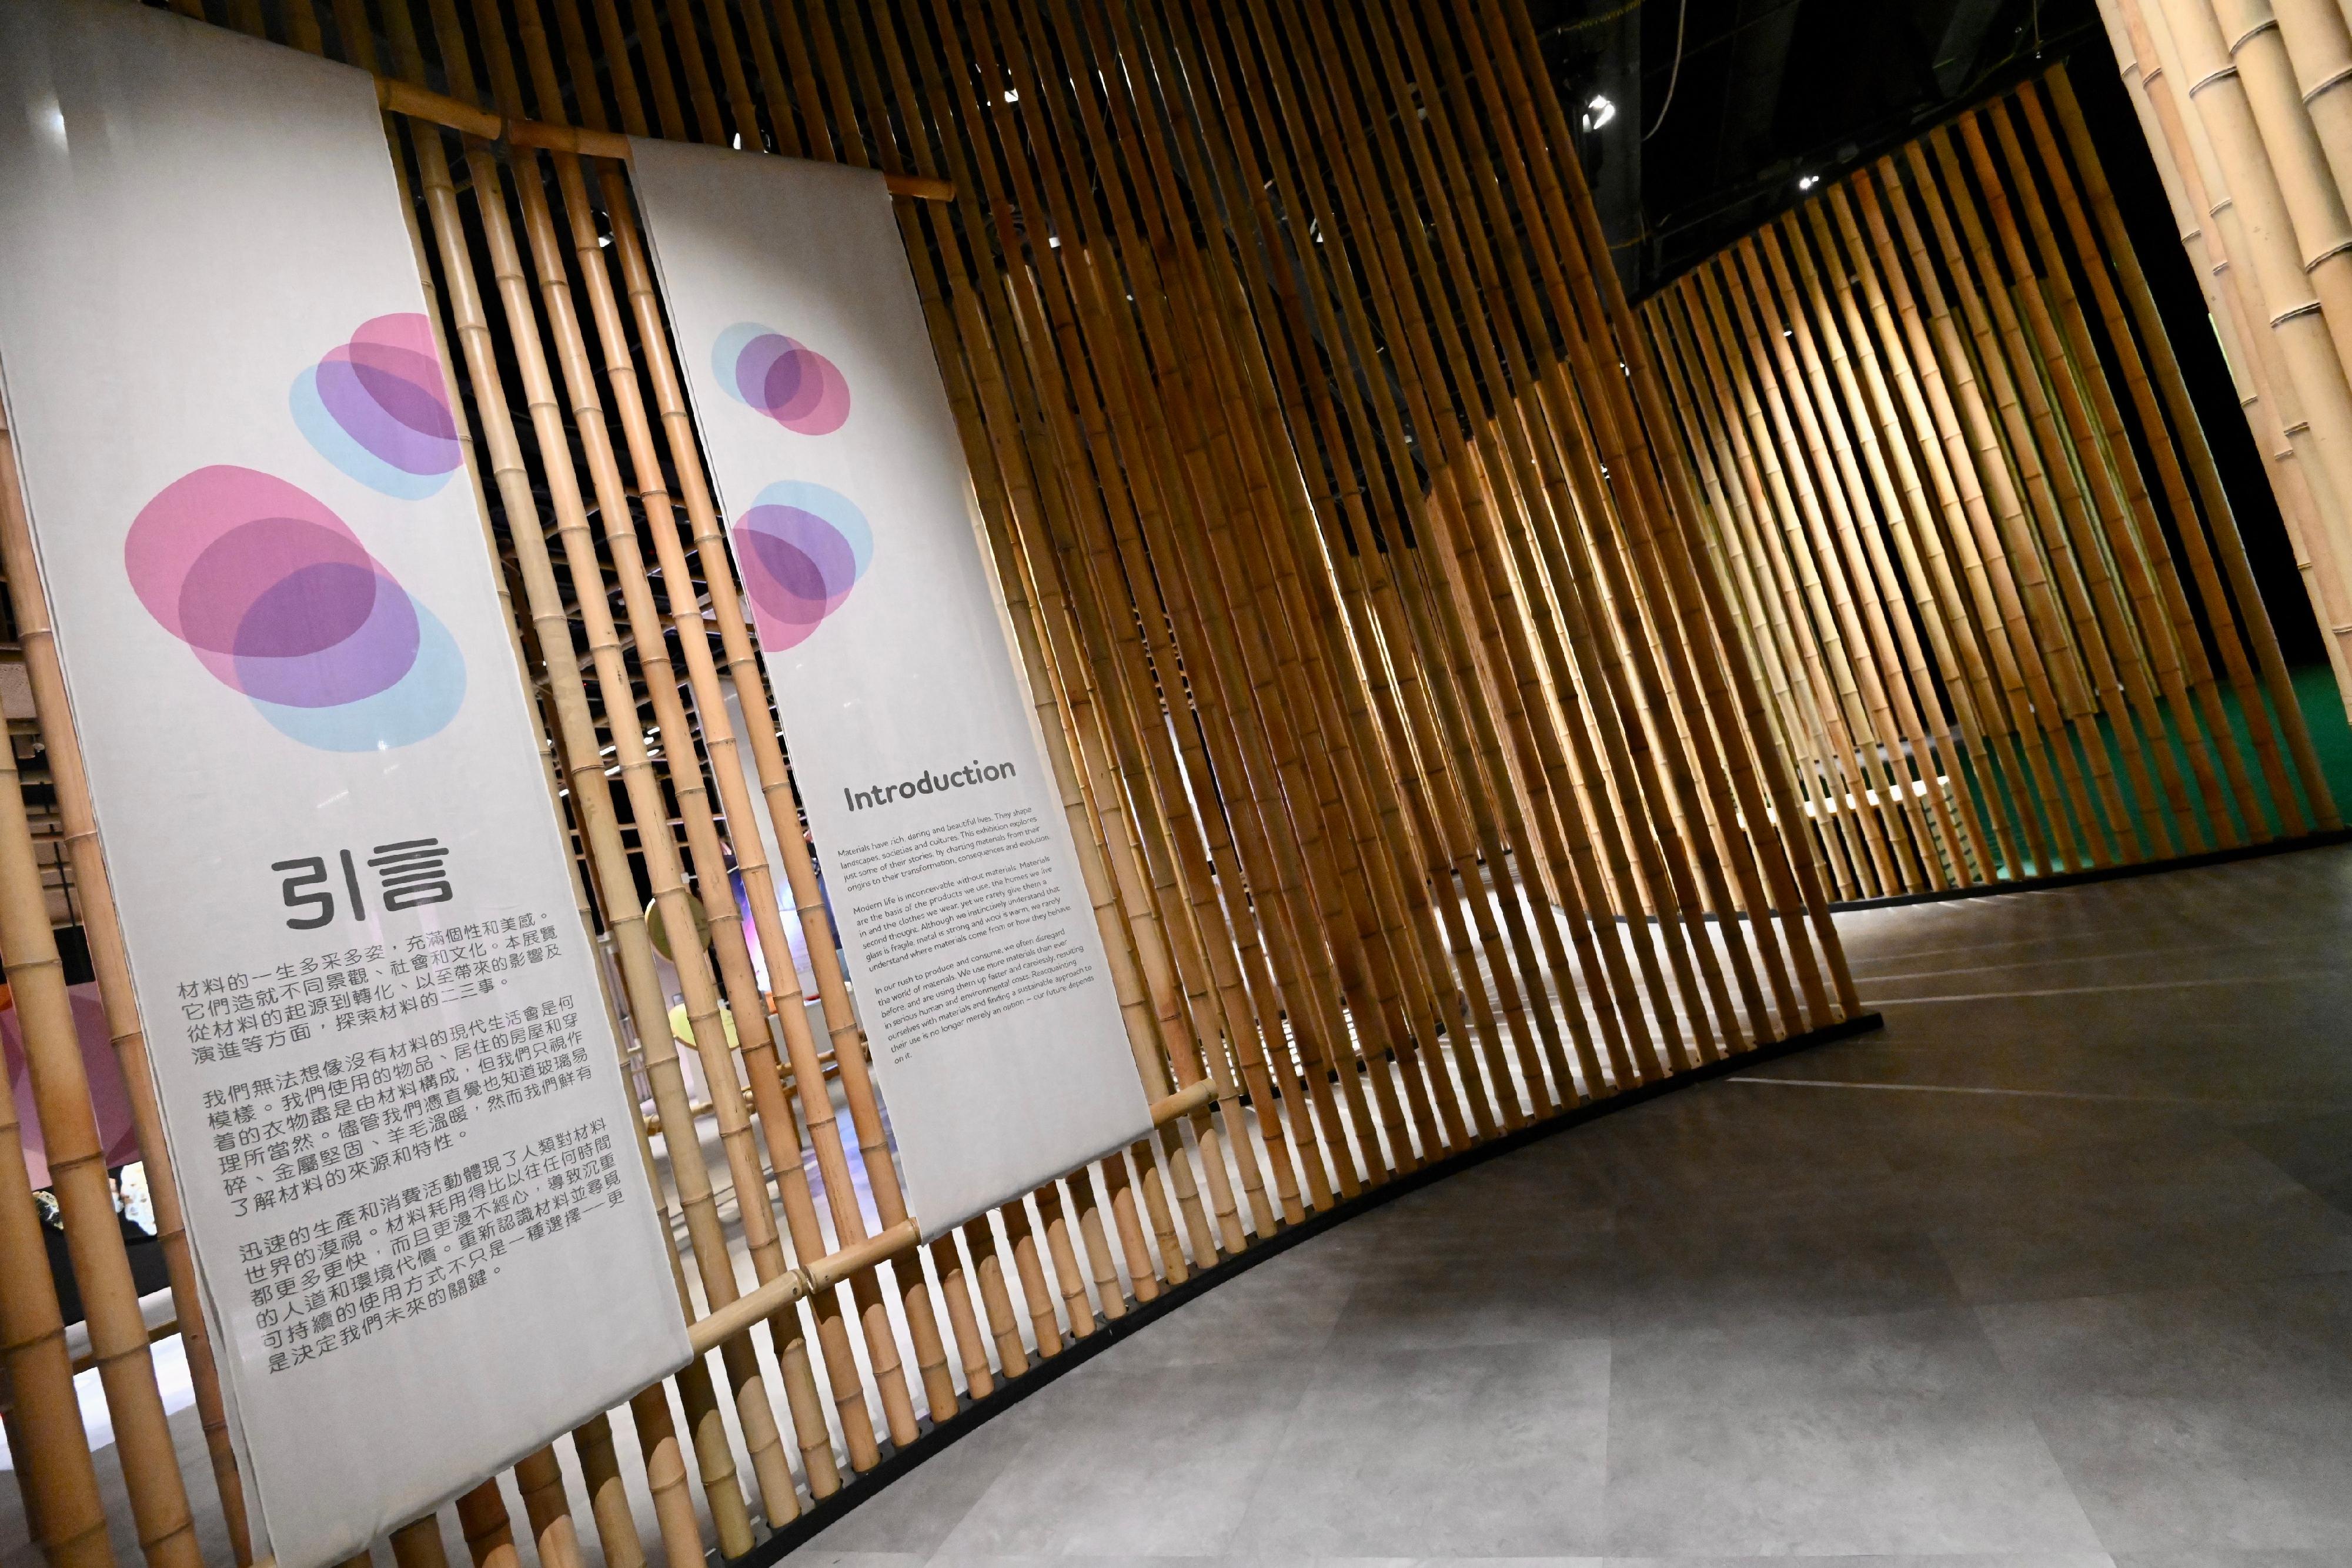 The Hong Kong Science Museum will present the "Material Tales - The Life of Things" exhibition starting from tomorrow (May 19). The exhibition takes bamboo as its design concept. 